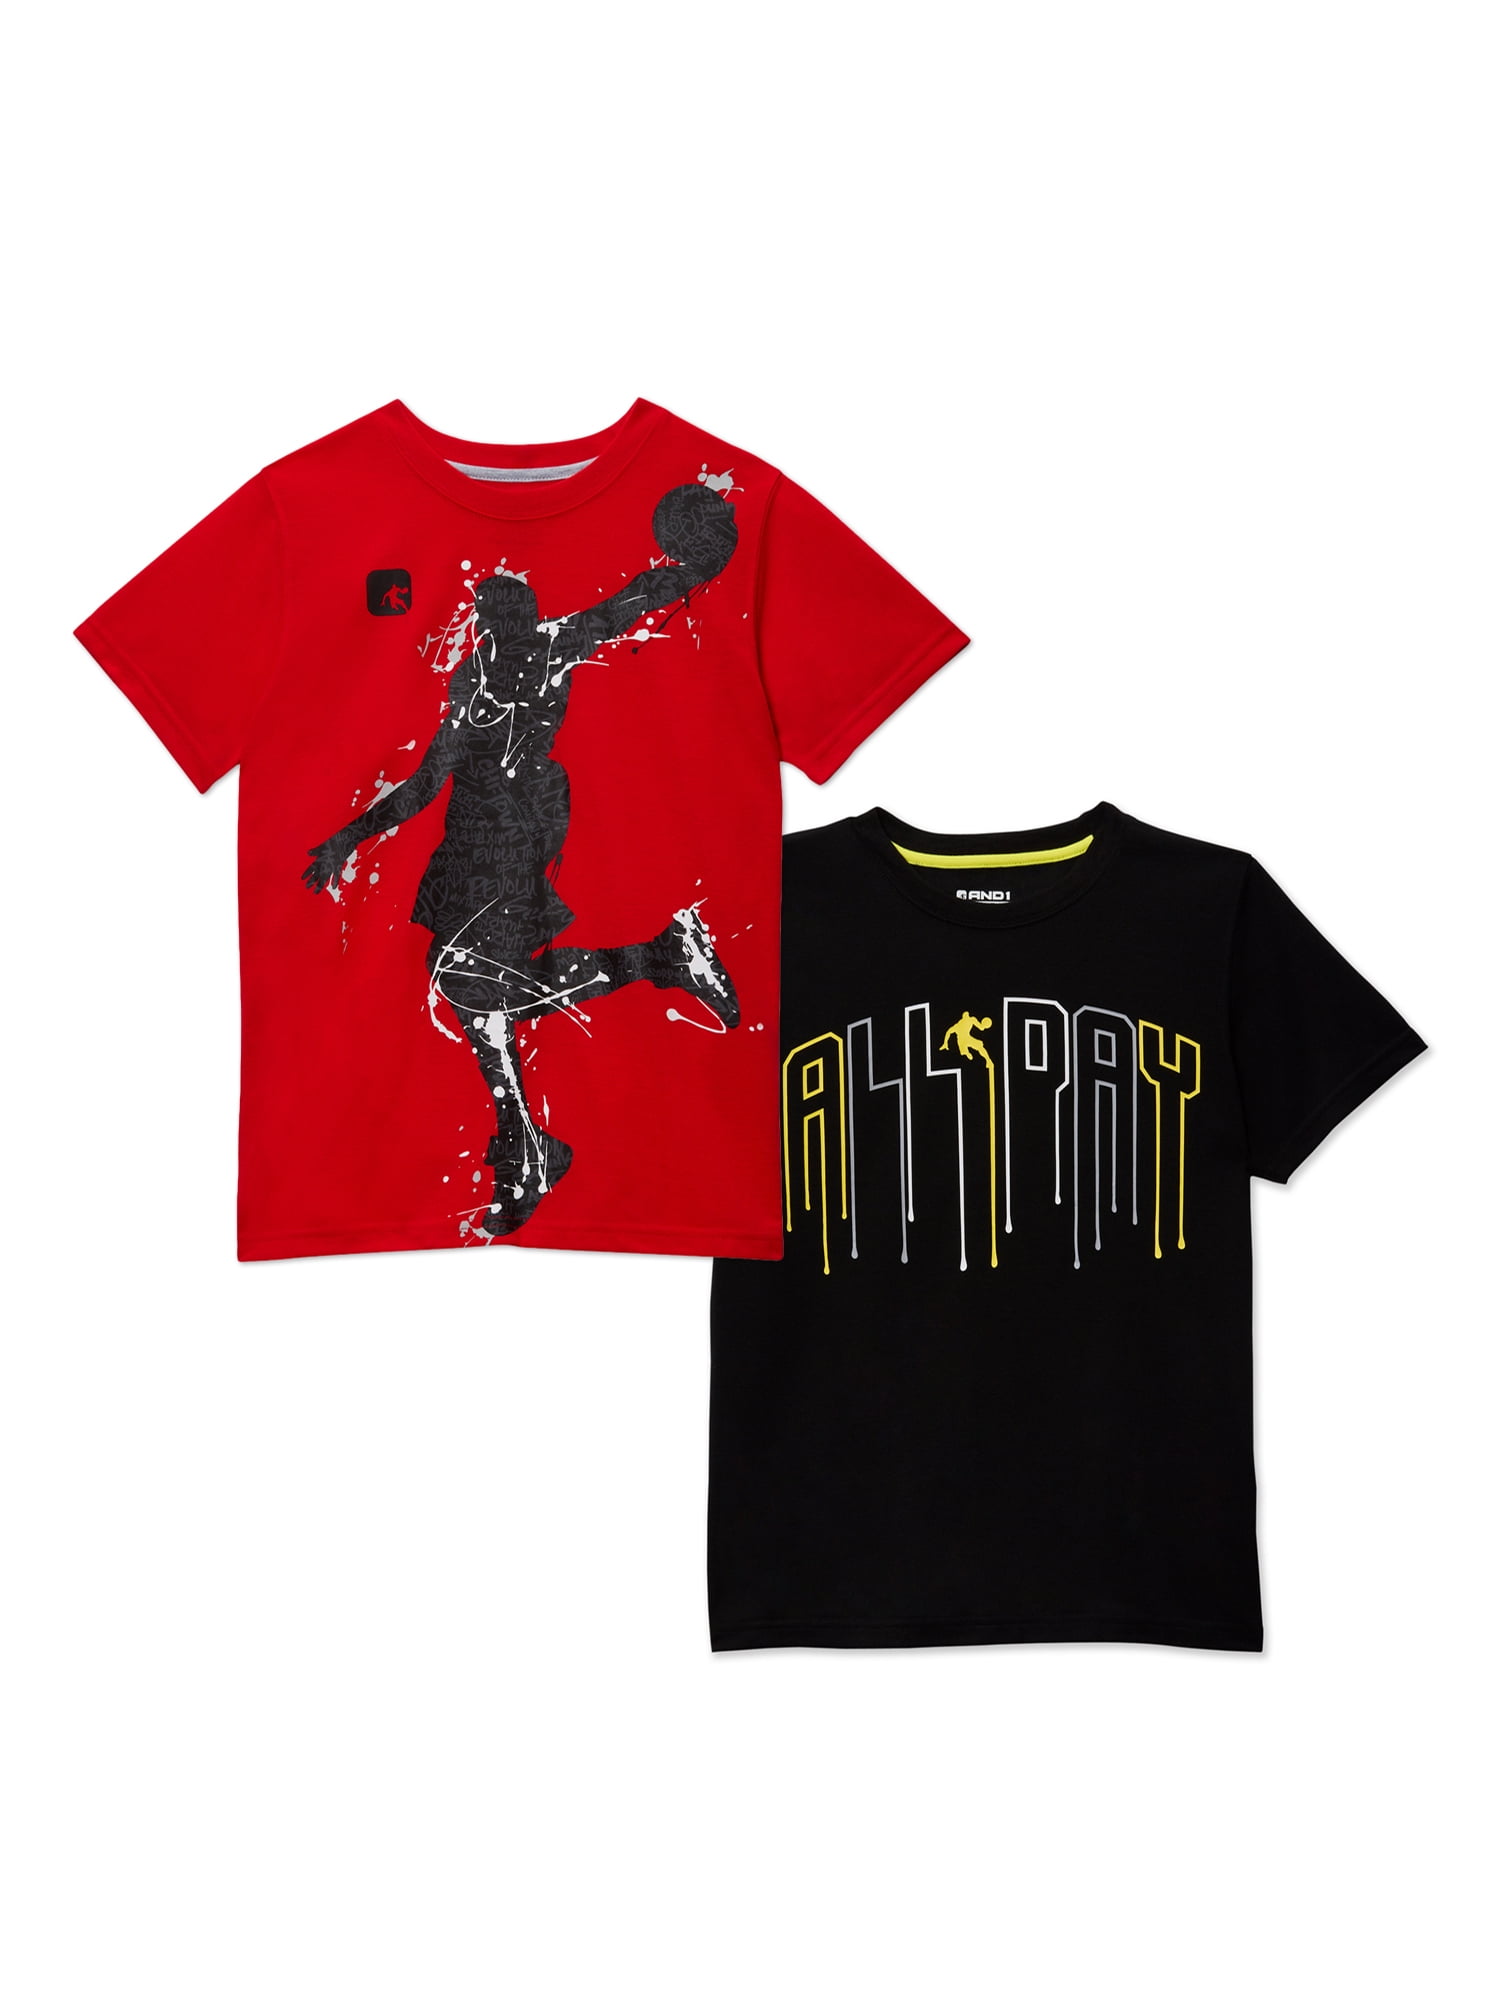 AND1 Boys Graphic Basketball Shirts 2-Pack, Sizes 4-18 